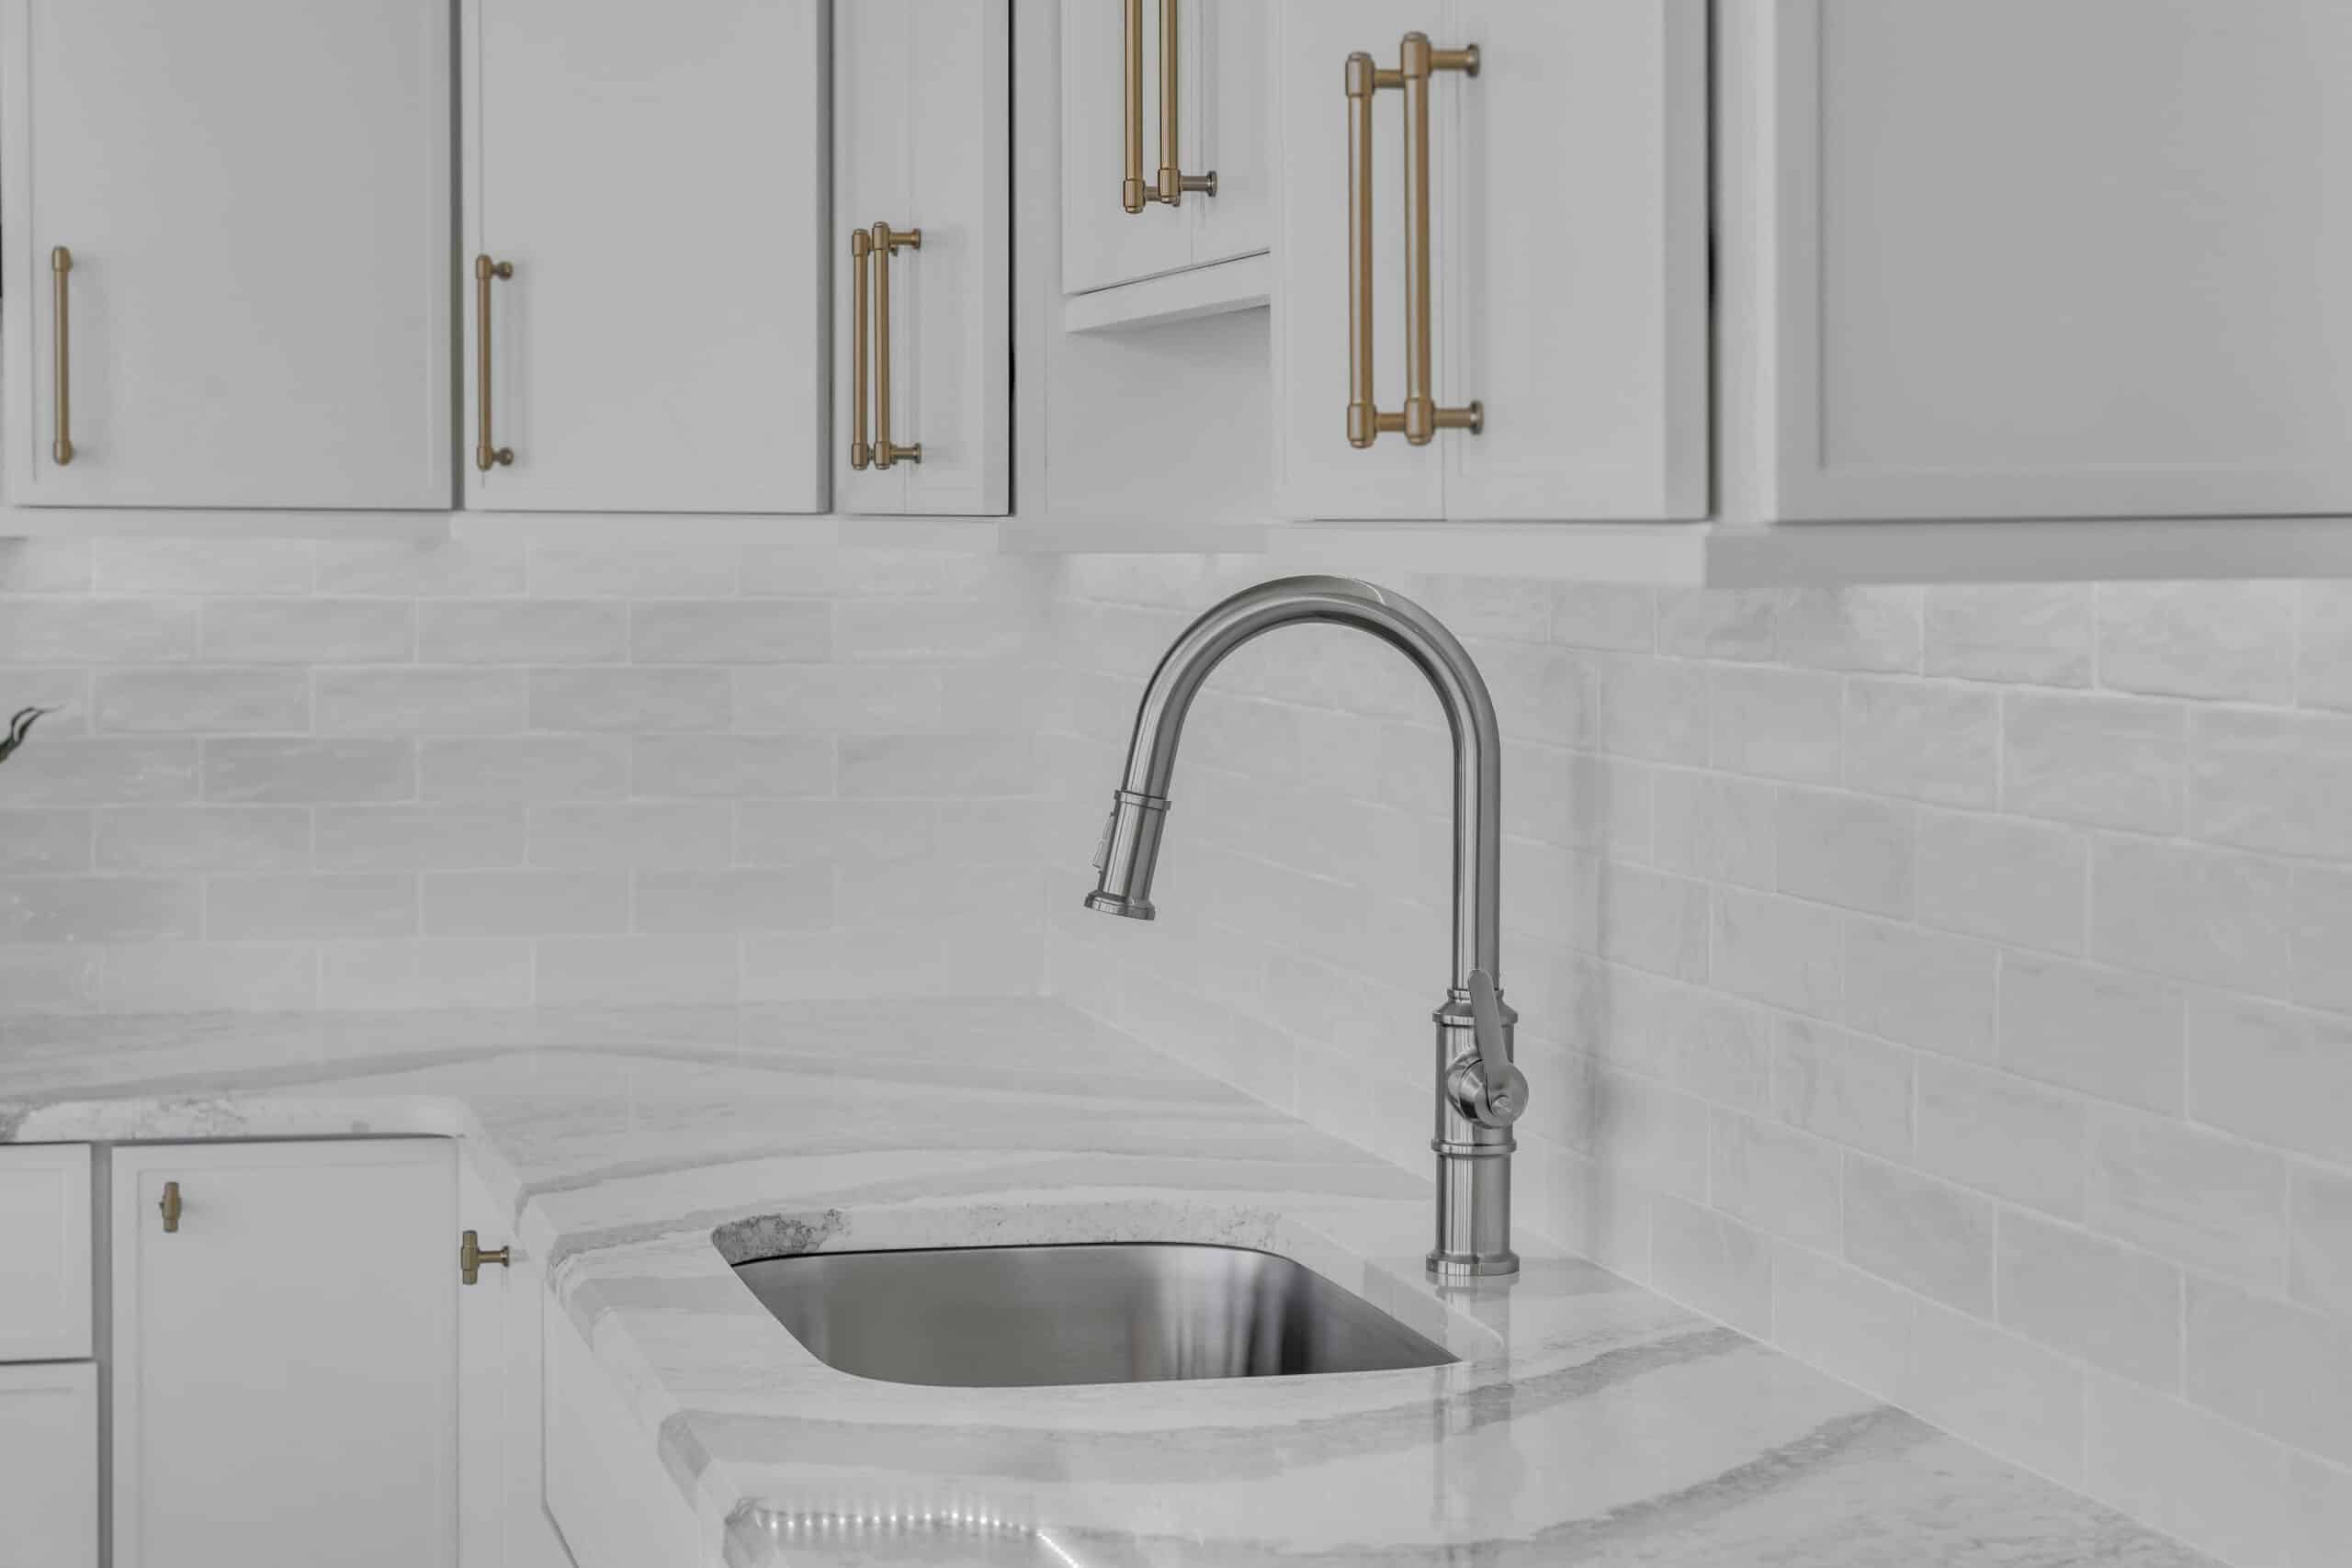 side view of kitchen sink and faucet with white wall cabinets